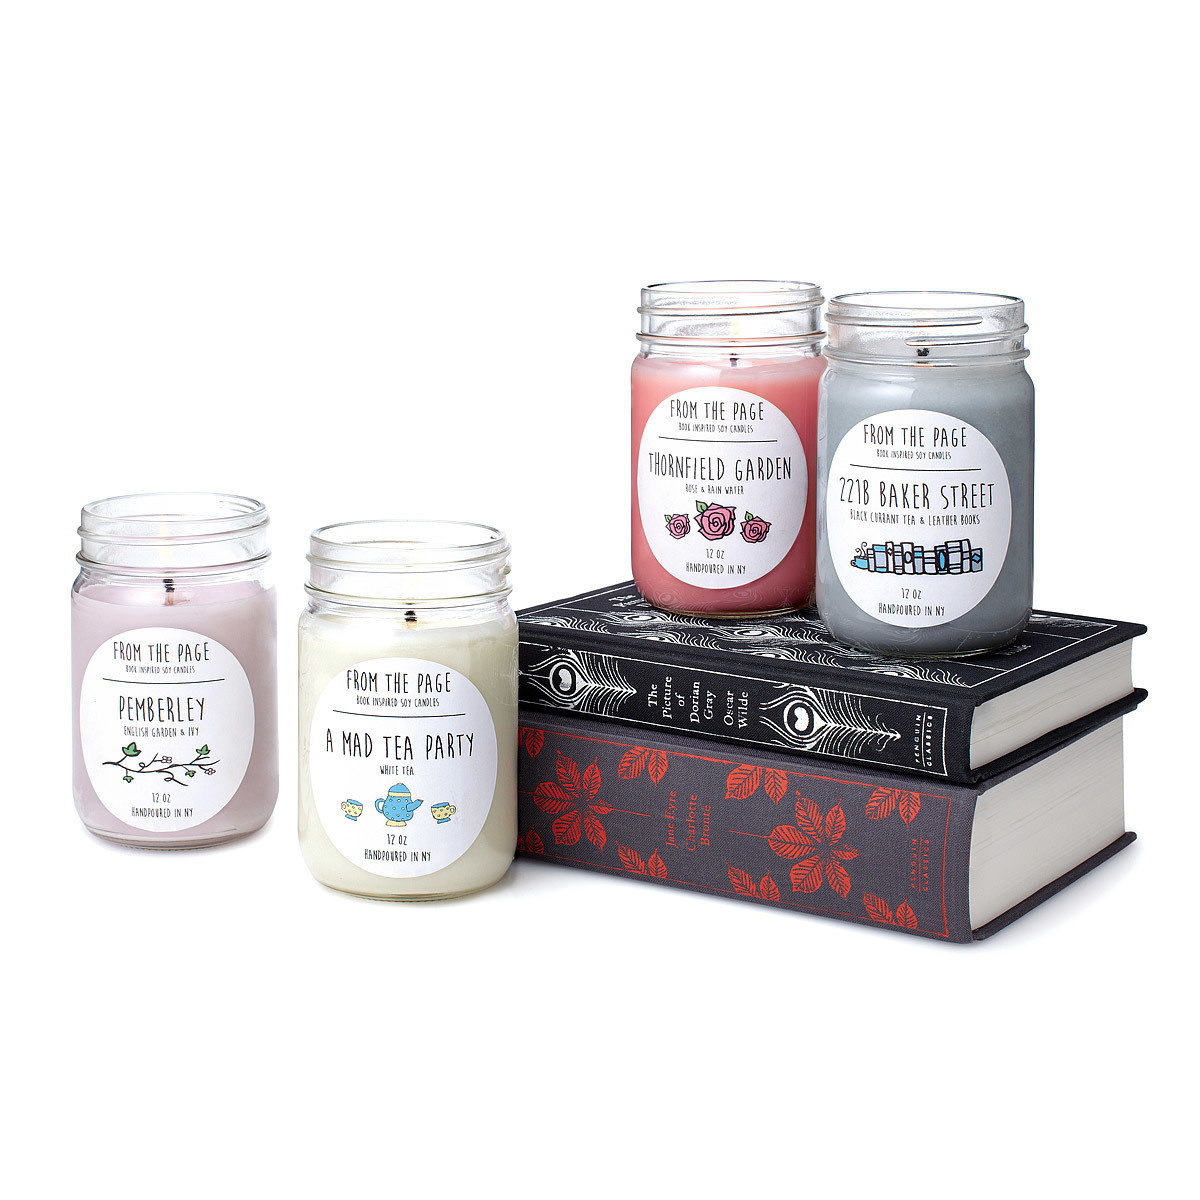 Those who love literary classics will appreciate these hand-poured soy candles from Valley Stream, New York. See the scents for each selection below!